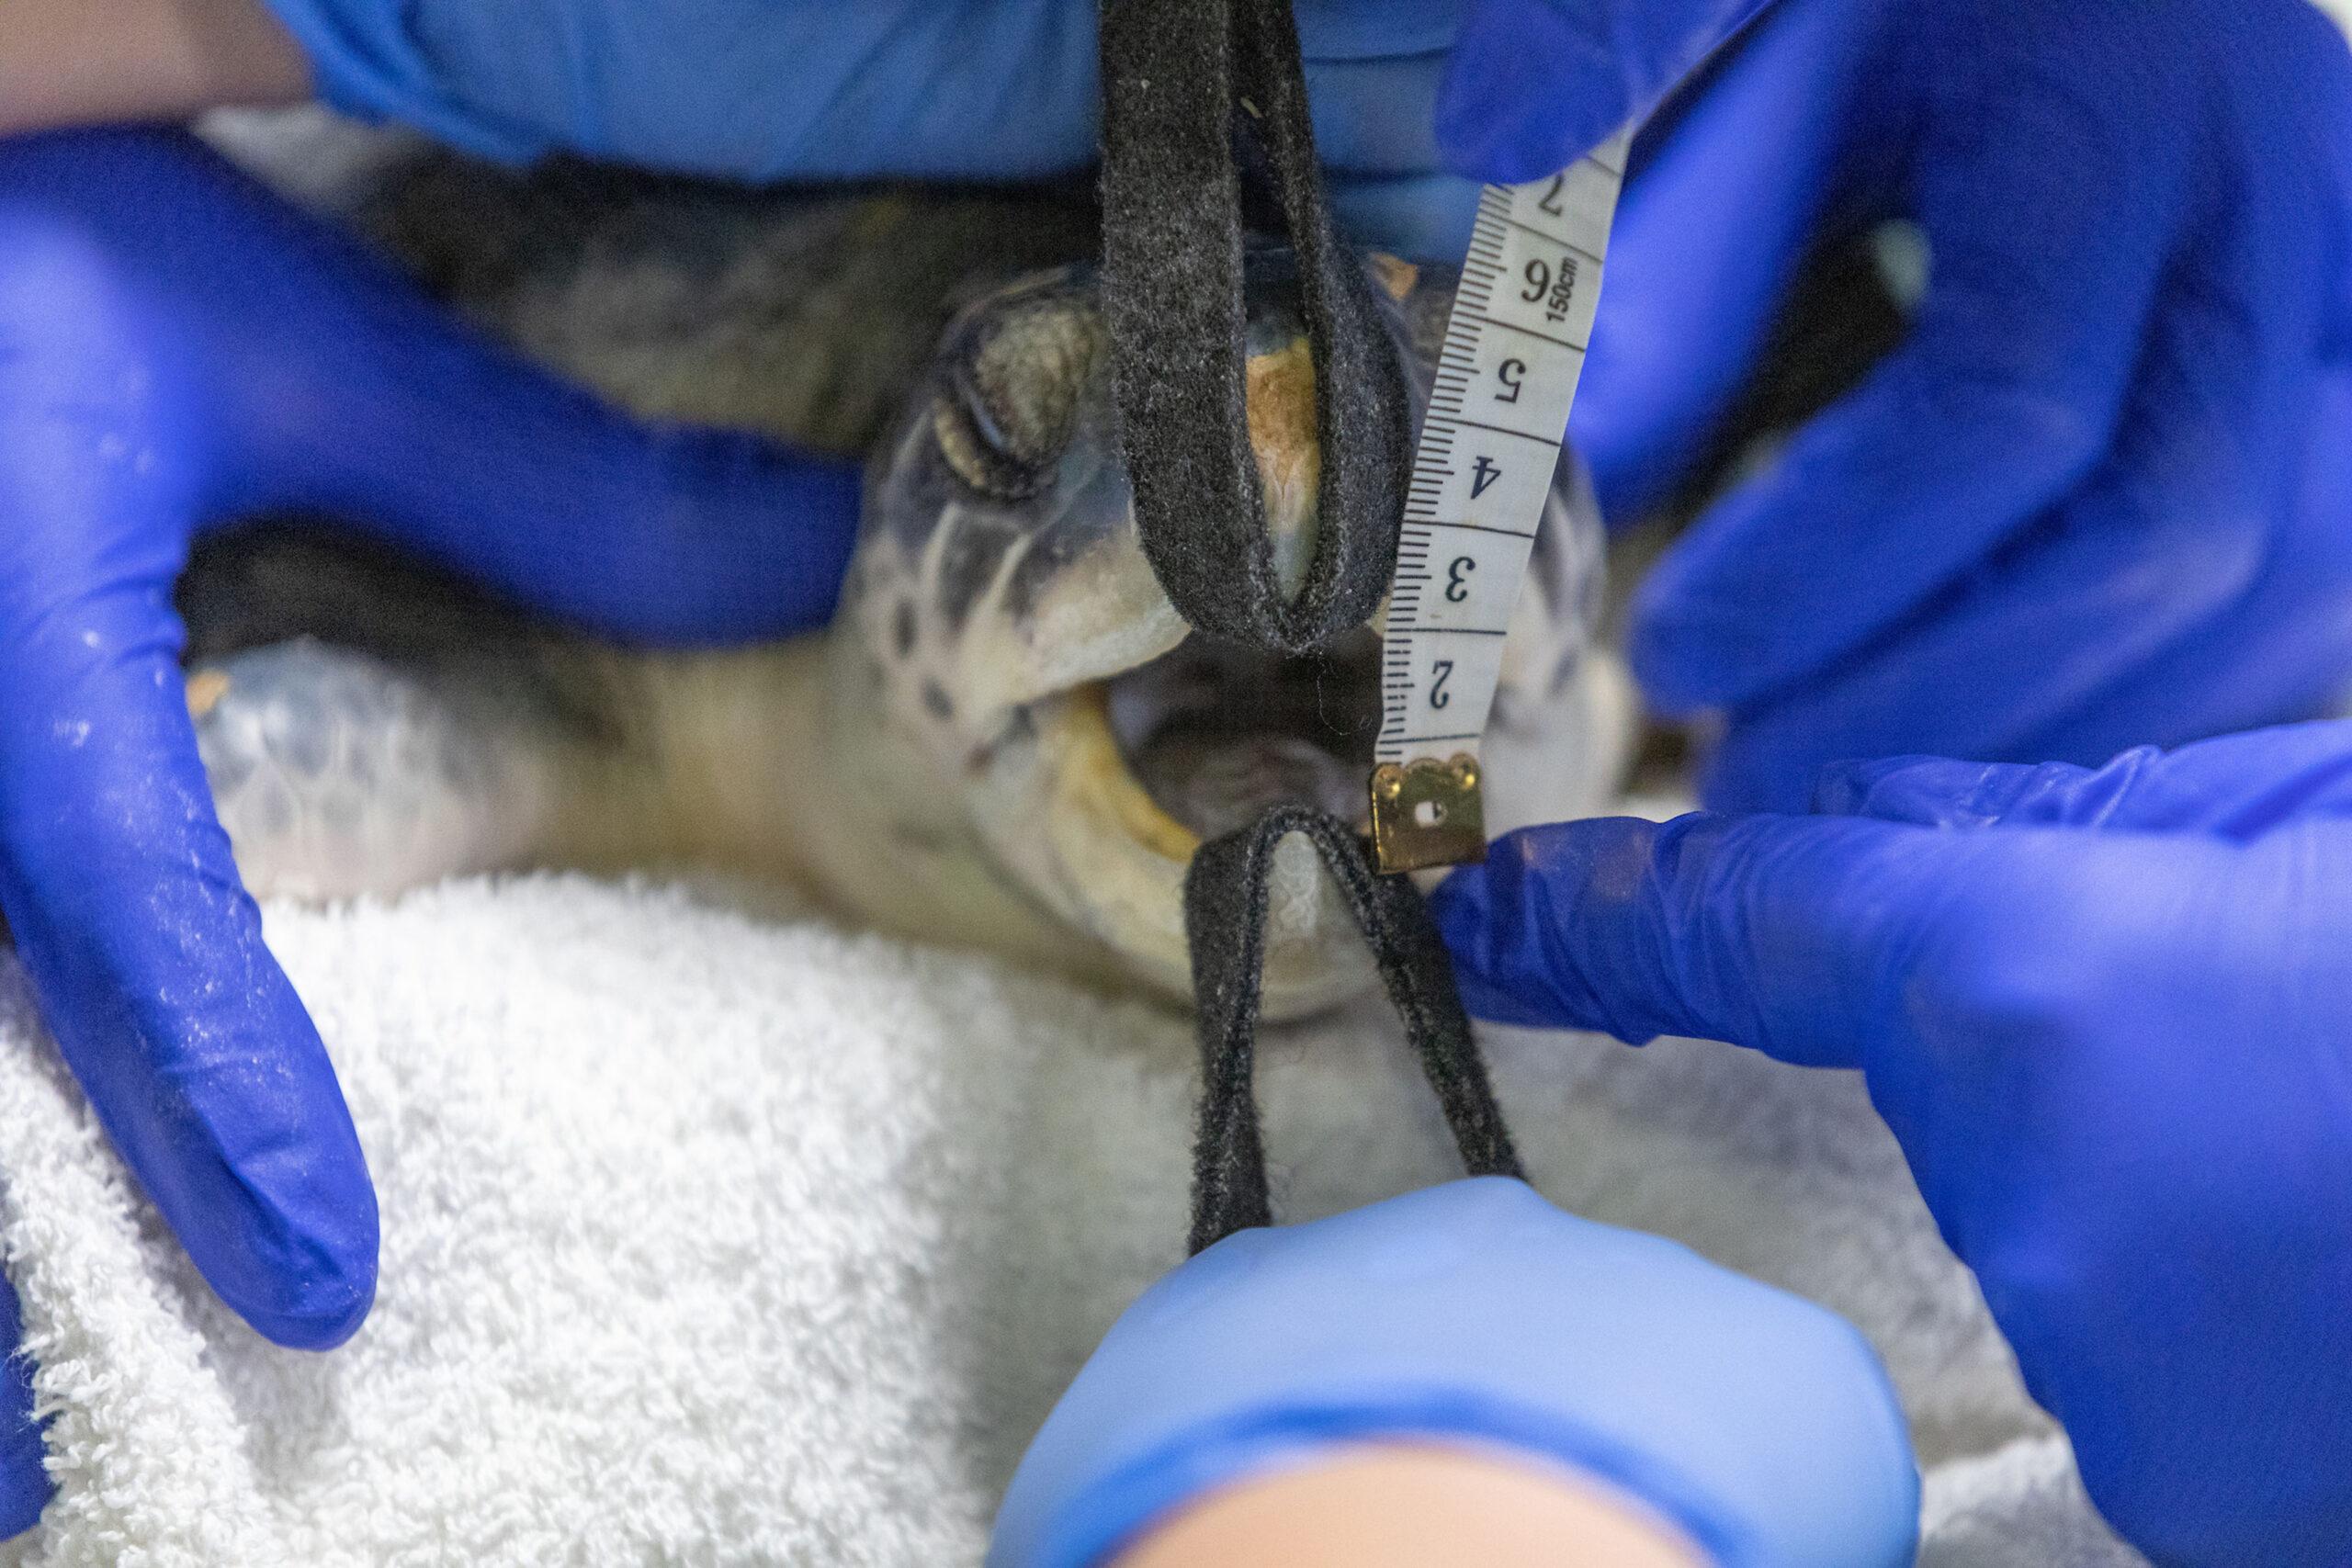 Rescued sea turtle gets acupuncture to treat injured jaw